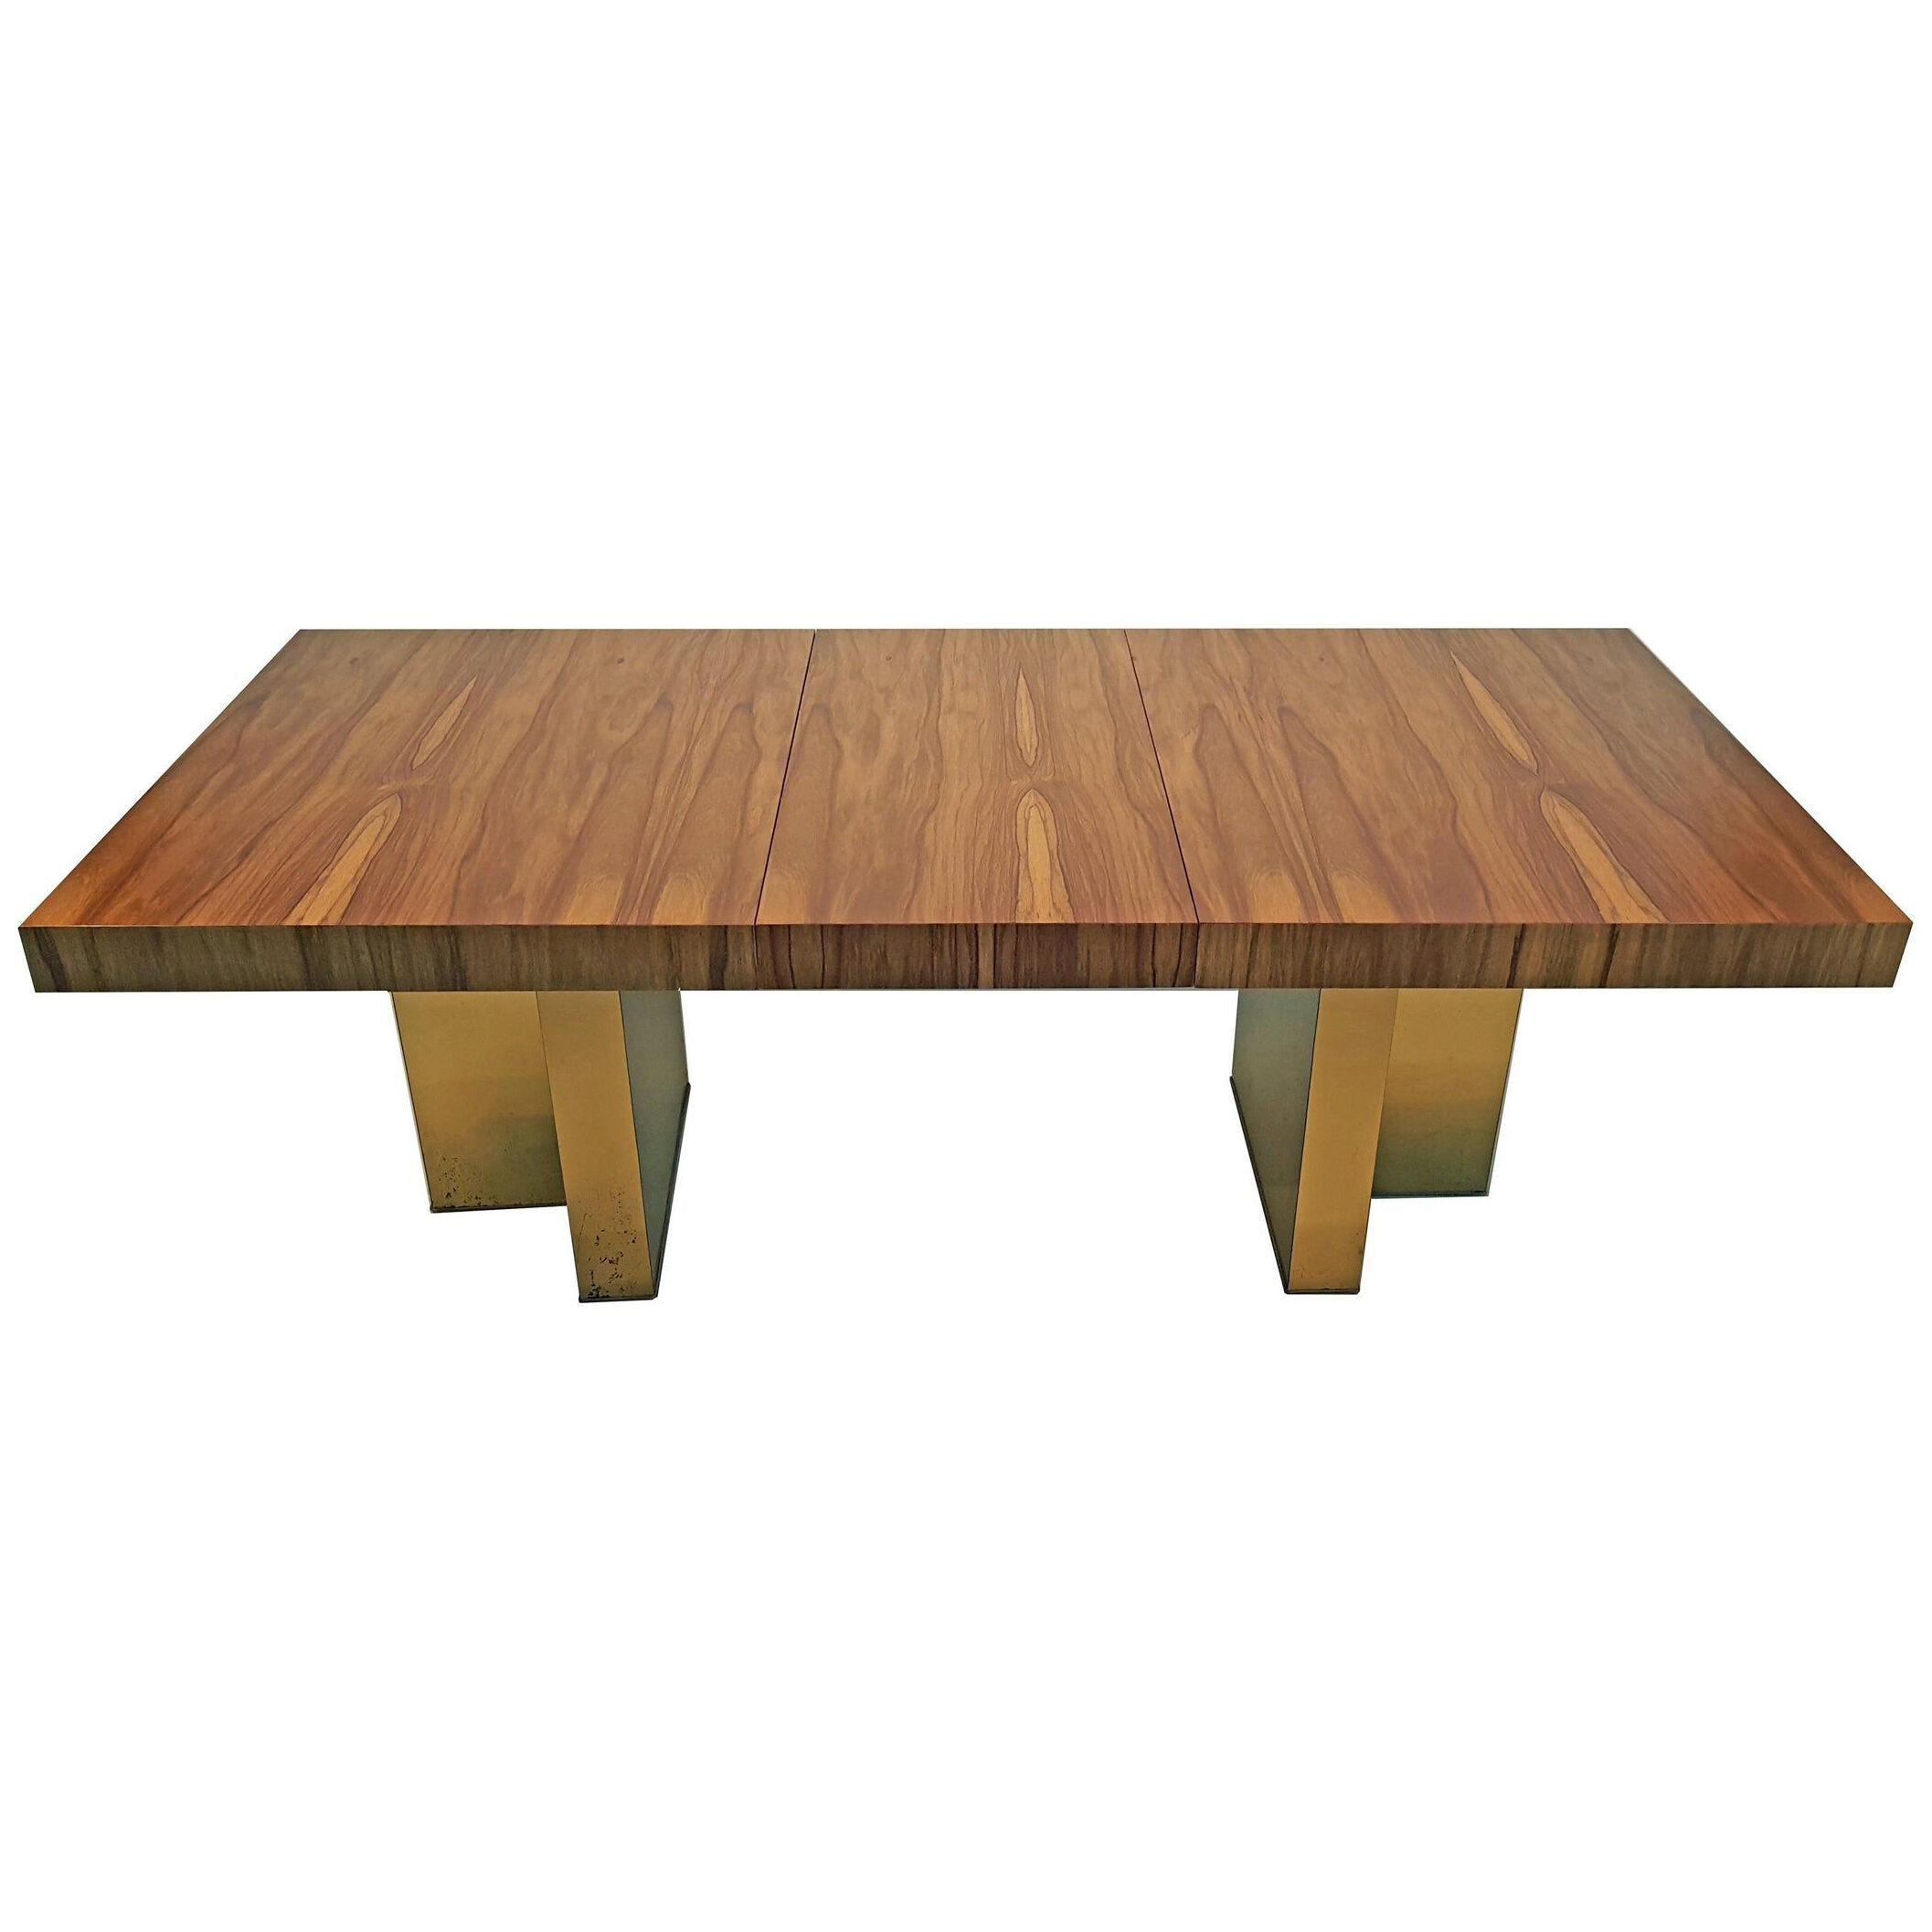 Milo Baughman Exotic Brazilian Rosewood and Brass Dining Table for Thayer Coggin